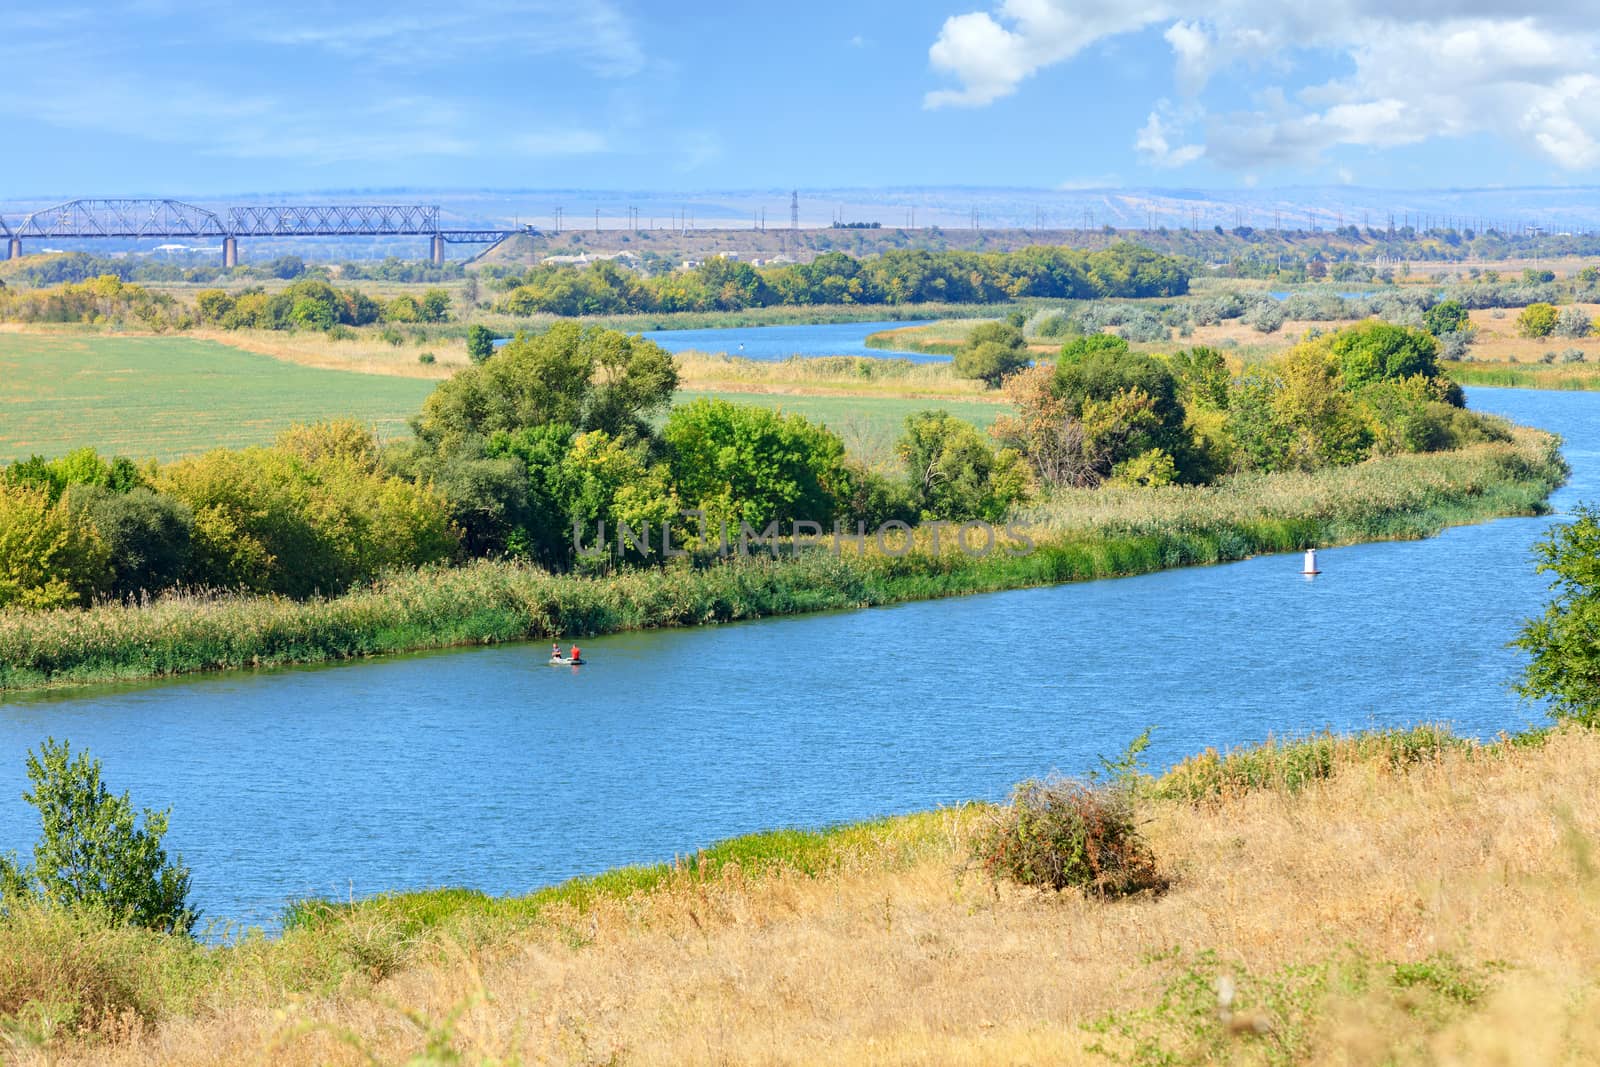 View of the Southern Bug River and the railway bridge on the horizon. by Sergii